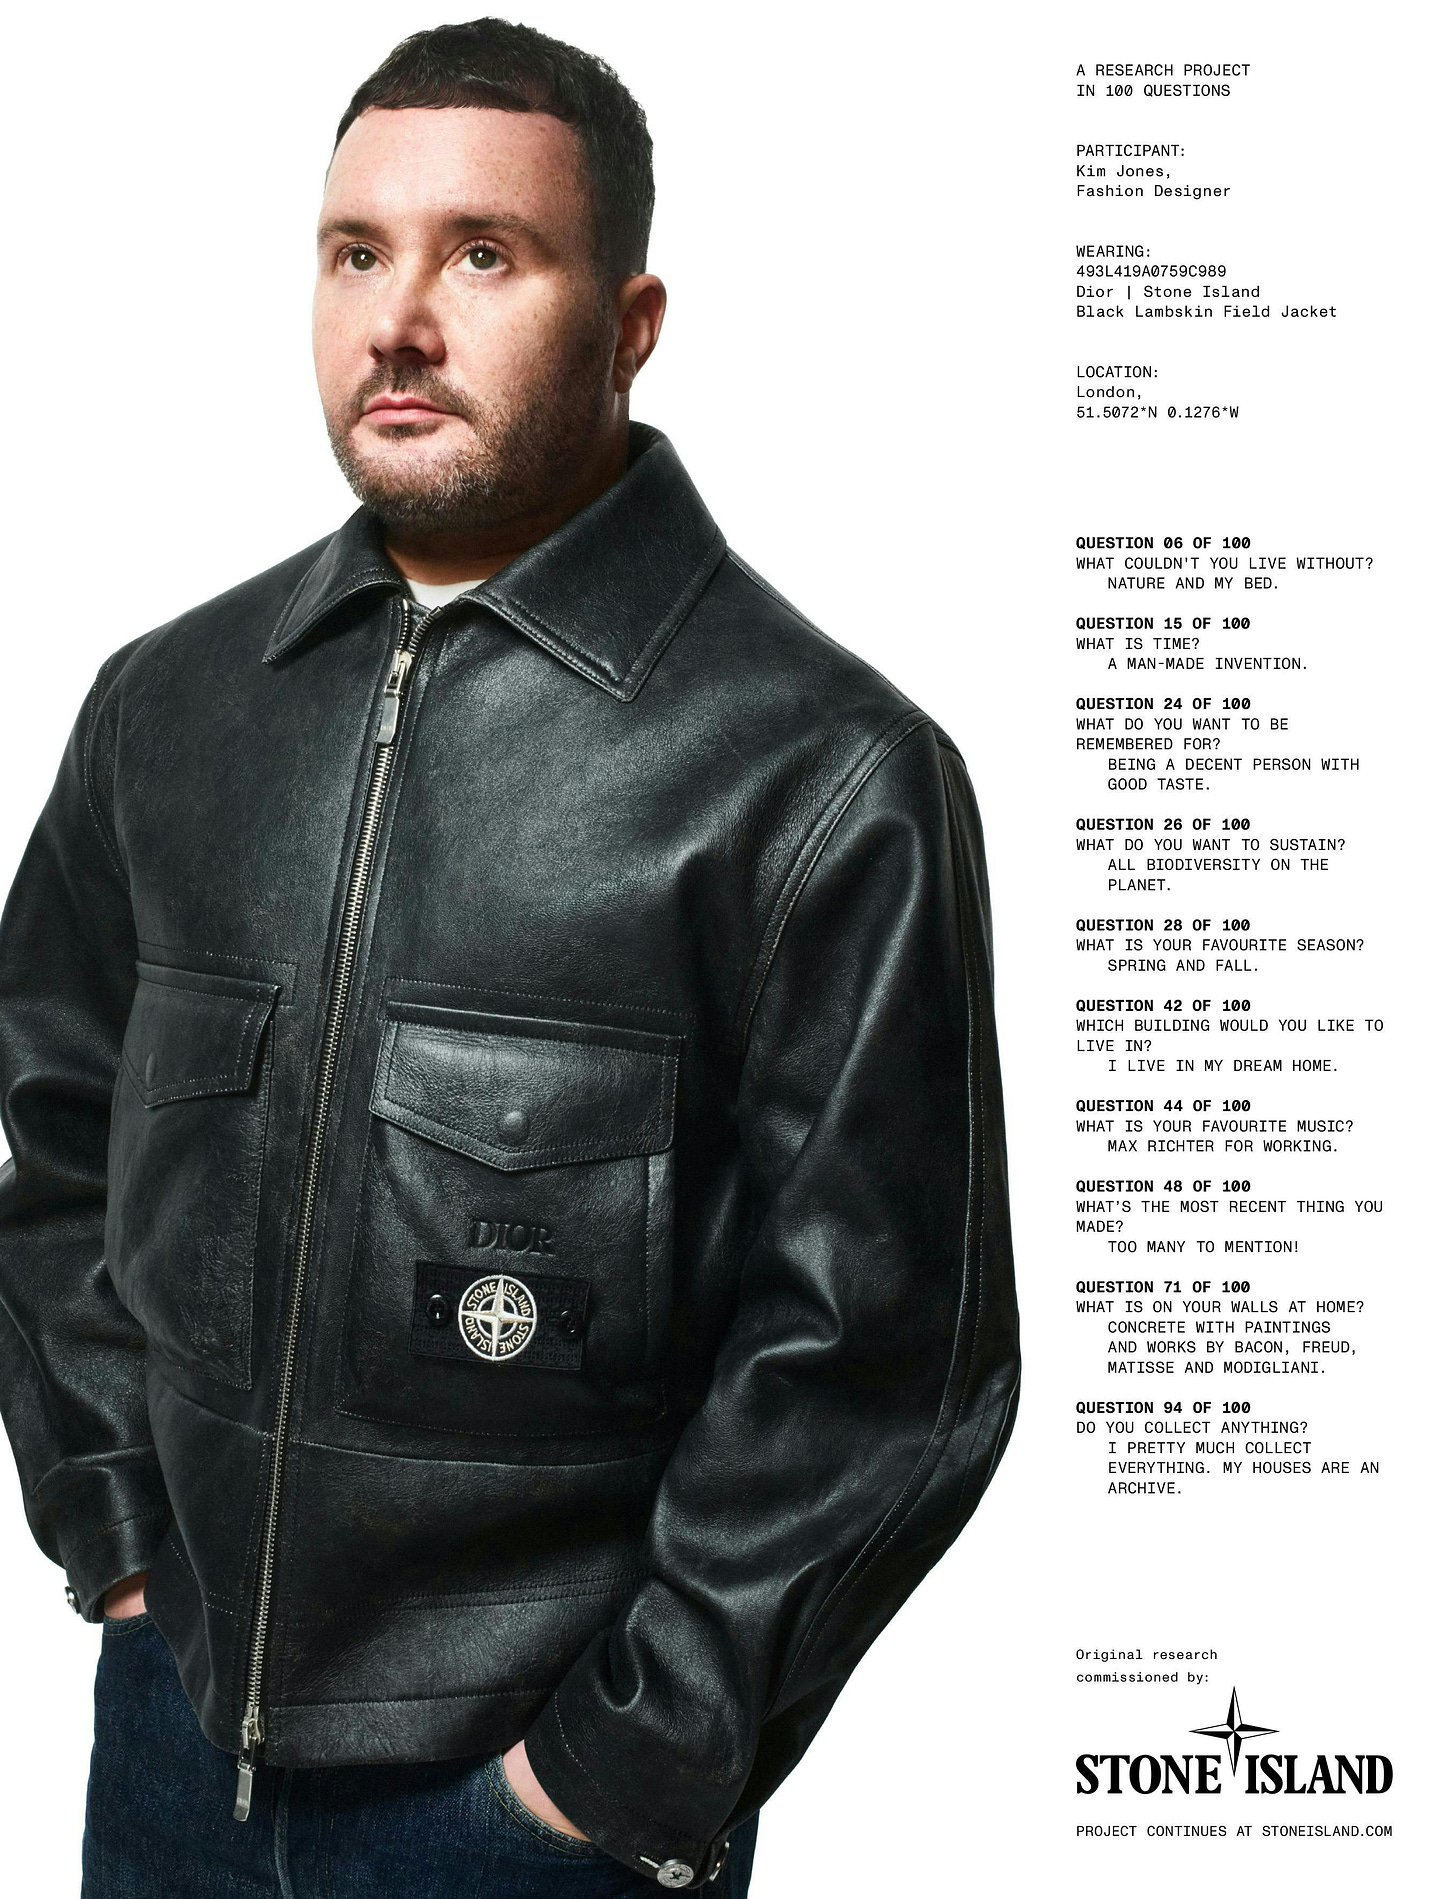 clothing coat jacket adult male man person leather jacket face head